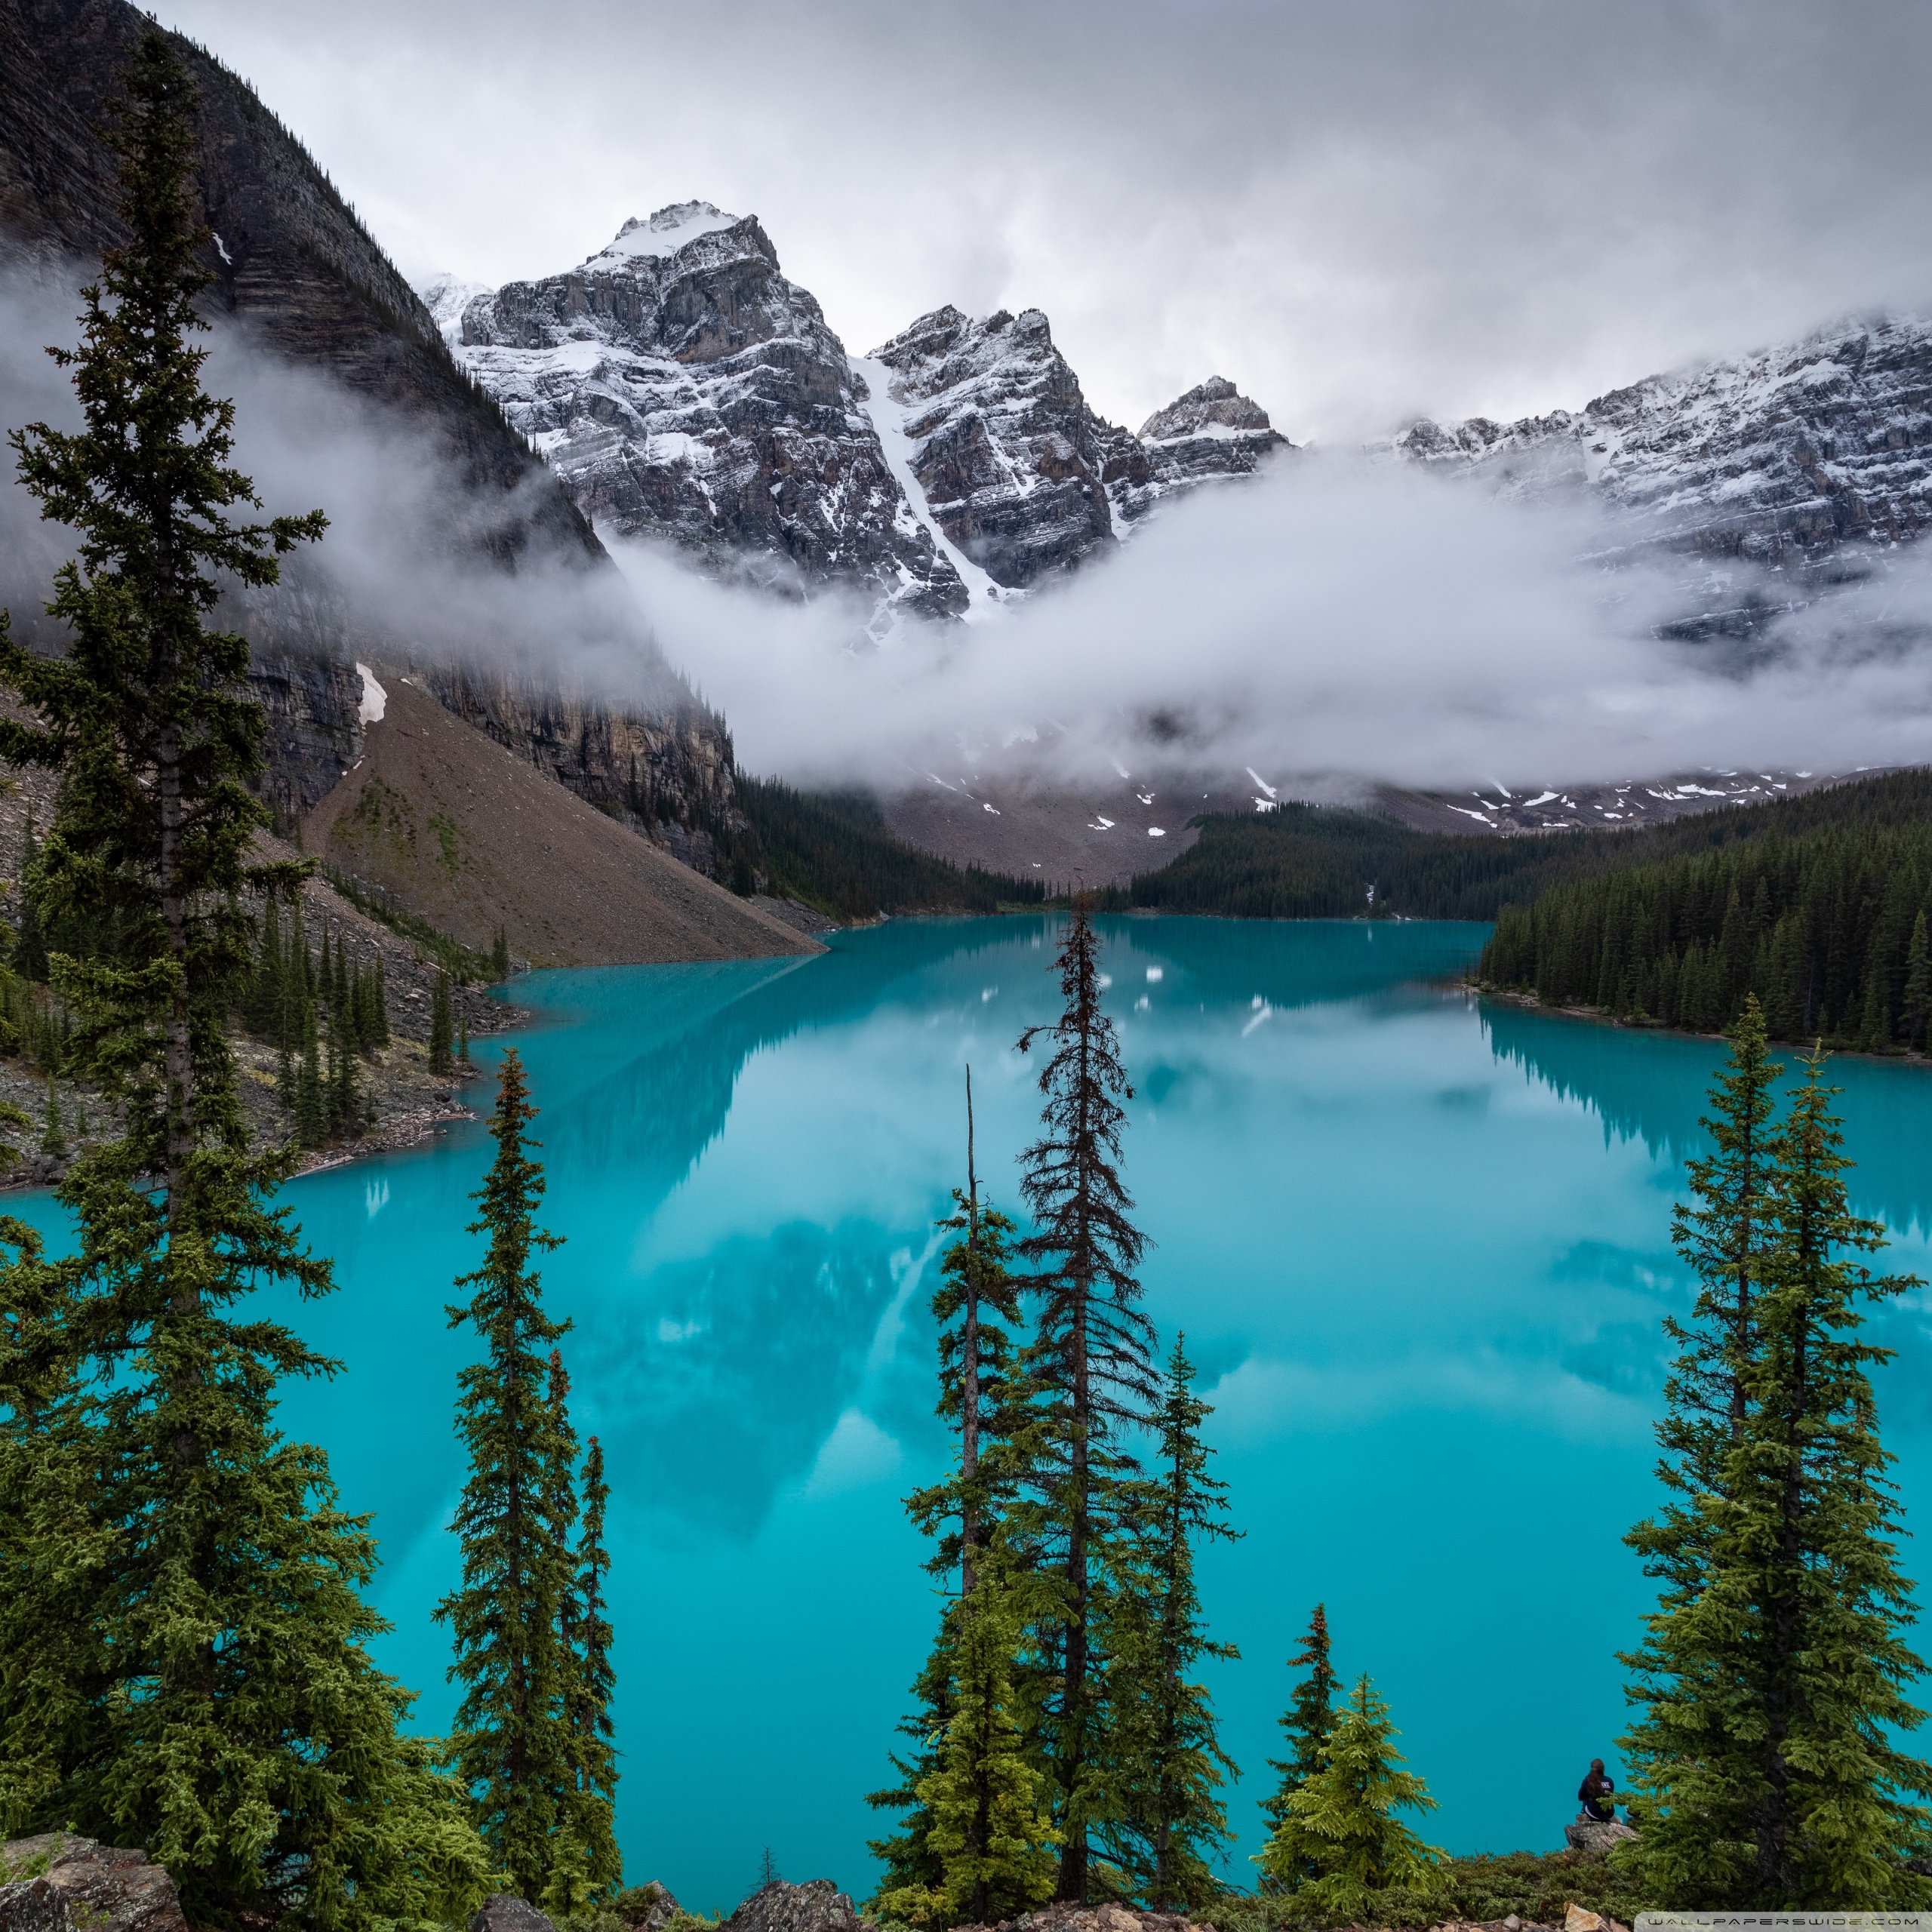 Moraine Lake Canadian Rockies Drone View Wallpapers